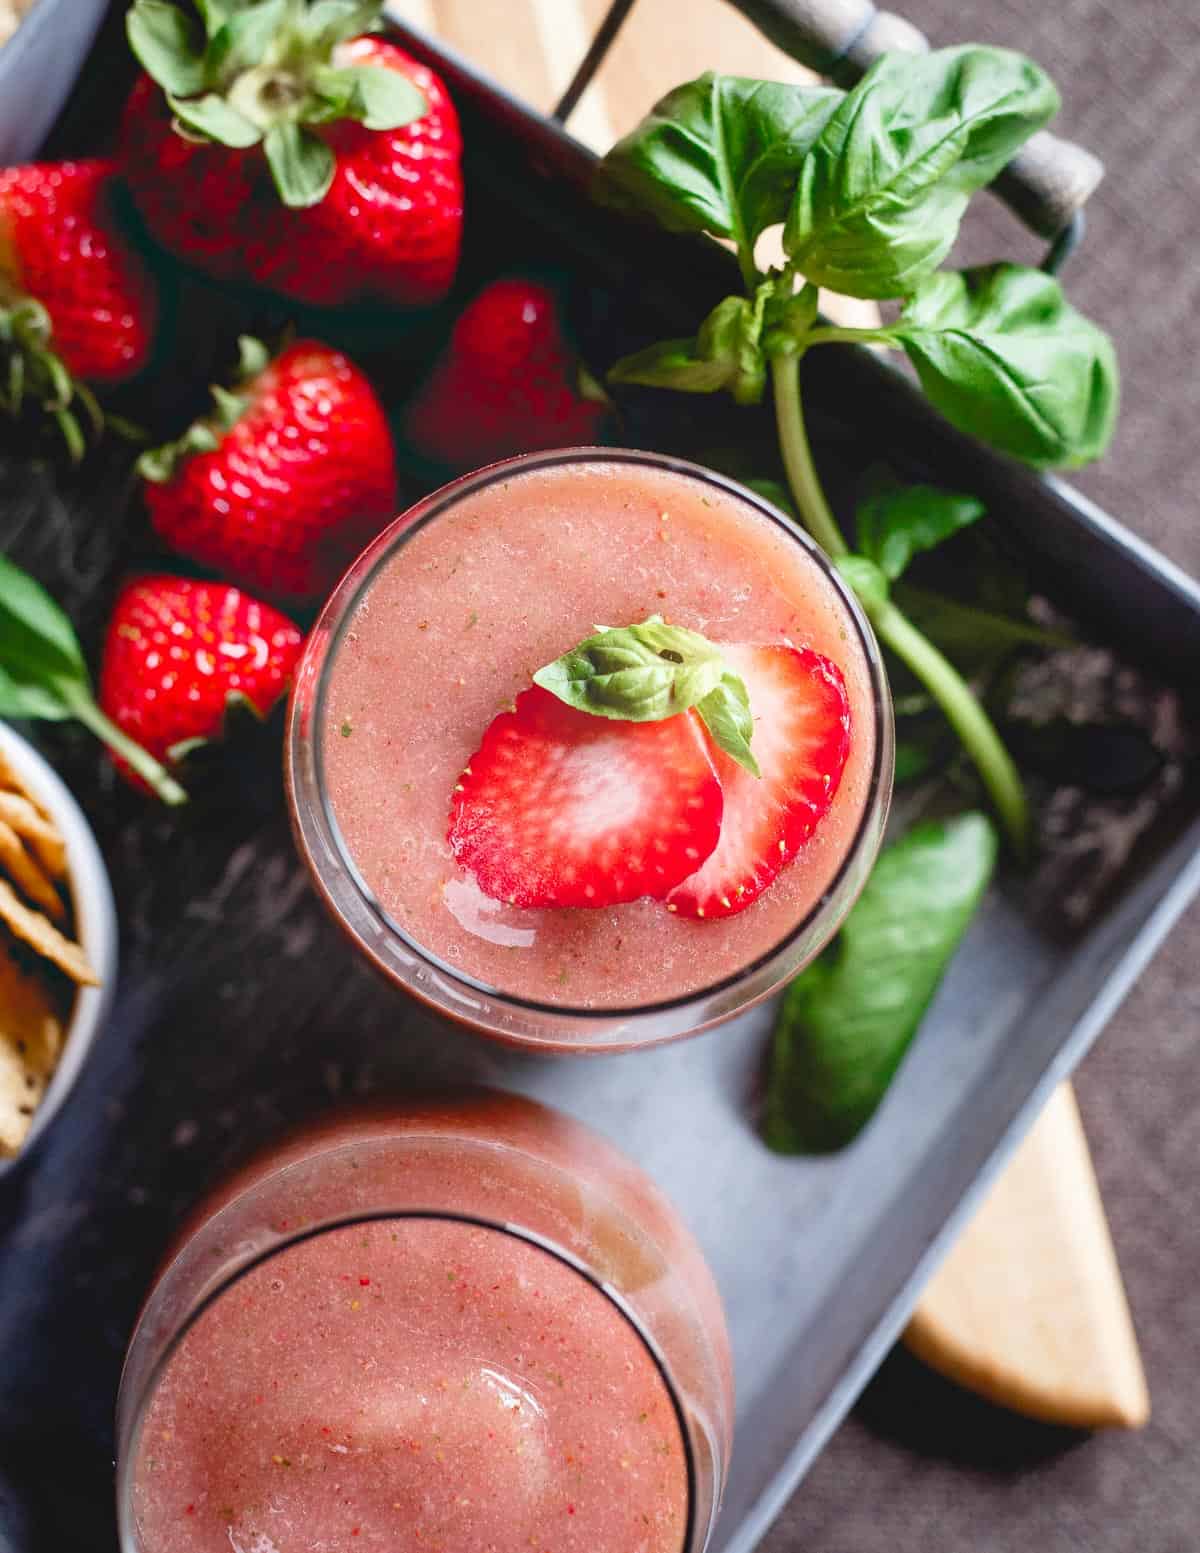 These strawberry basil cider slushies are the perfect refreshing summer drink. Just 3 ingredients and your blender for the happiest of happy hours!